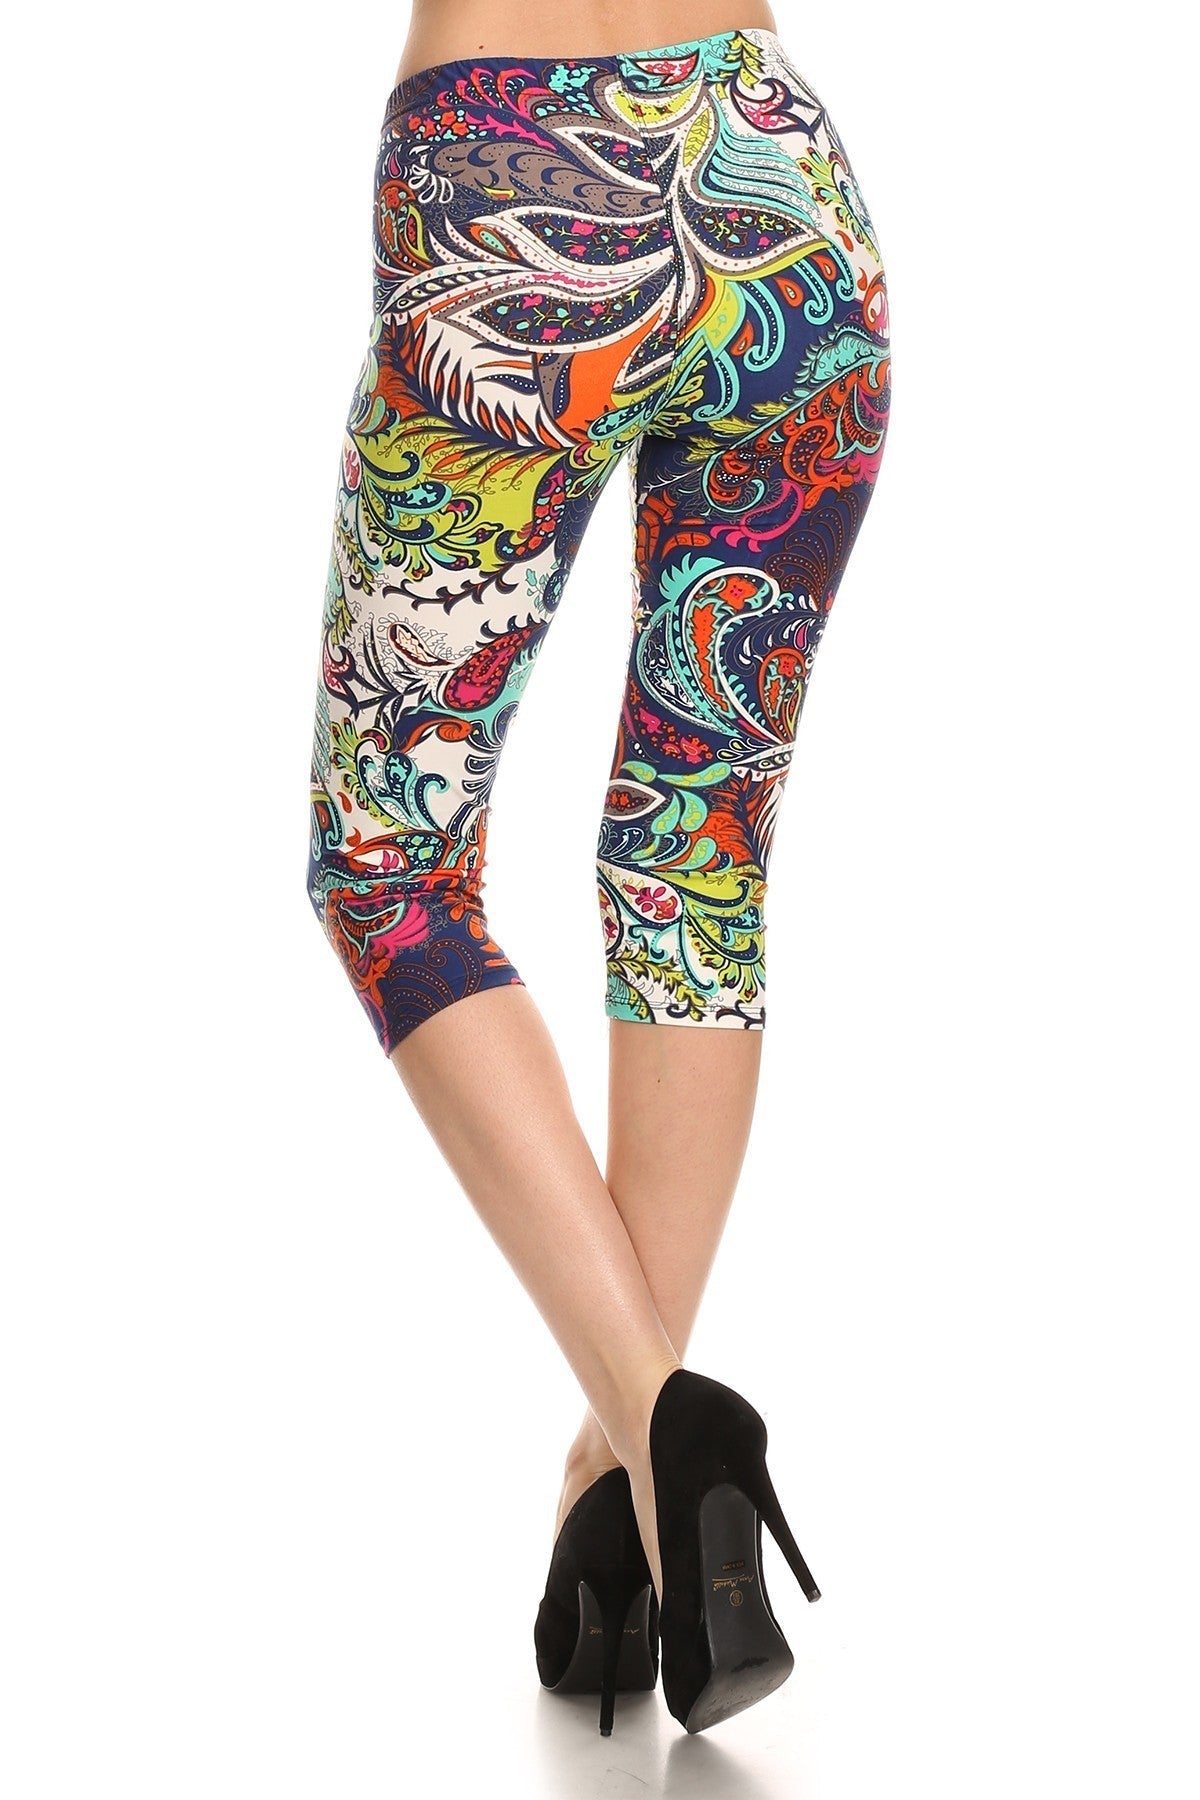 Multi-color Ornate Print Cropped Length Fitted Leggings With High Elastic Waist. Bottoms jehouze 